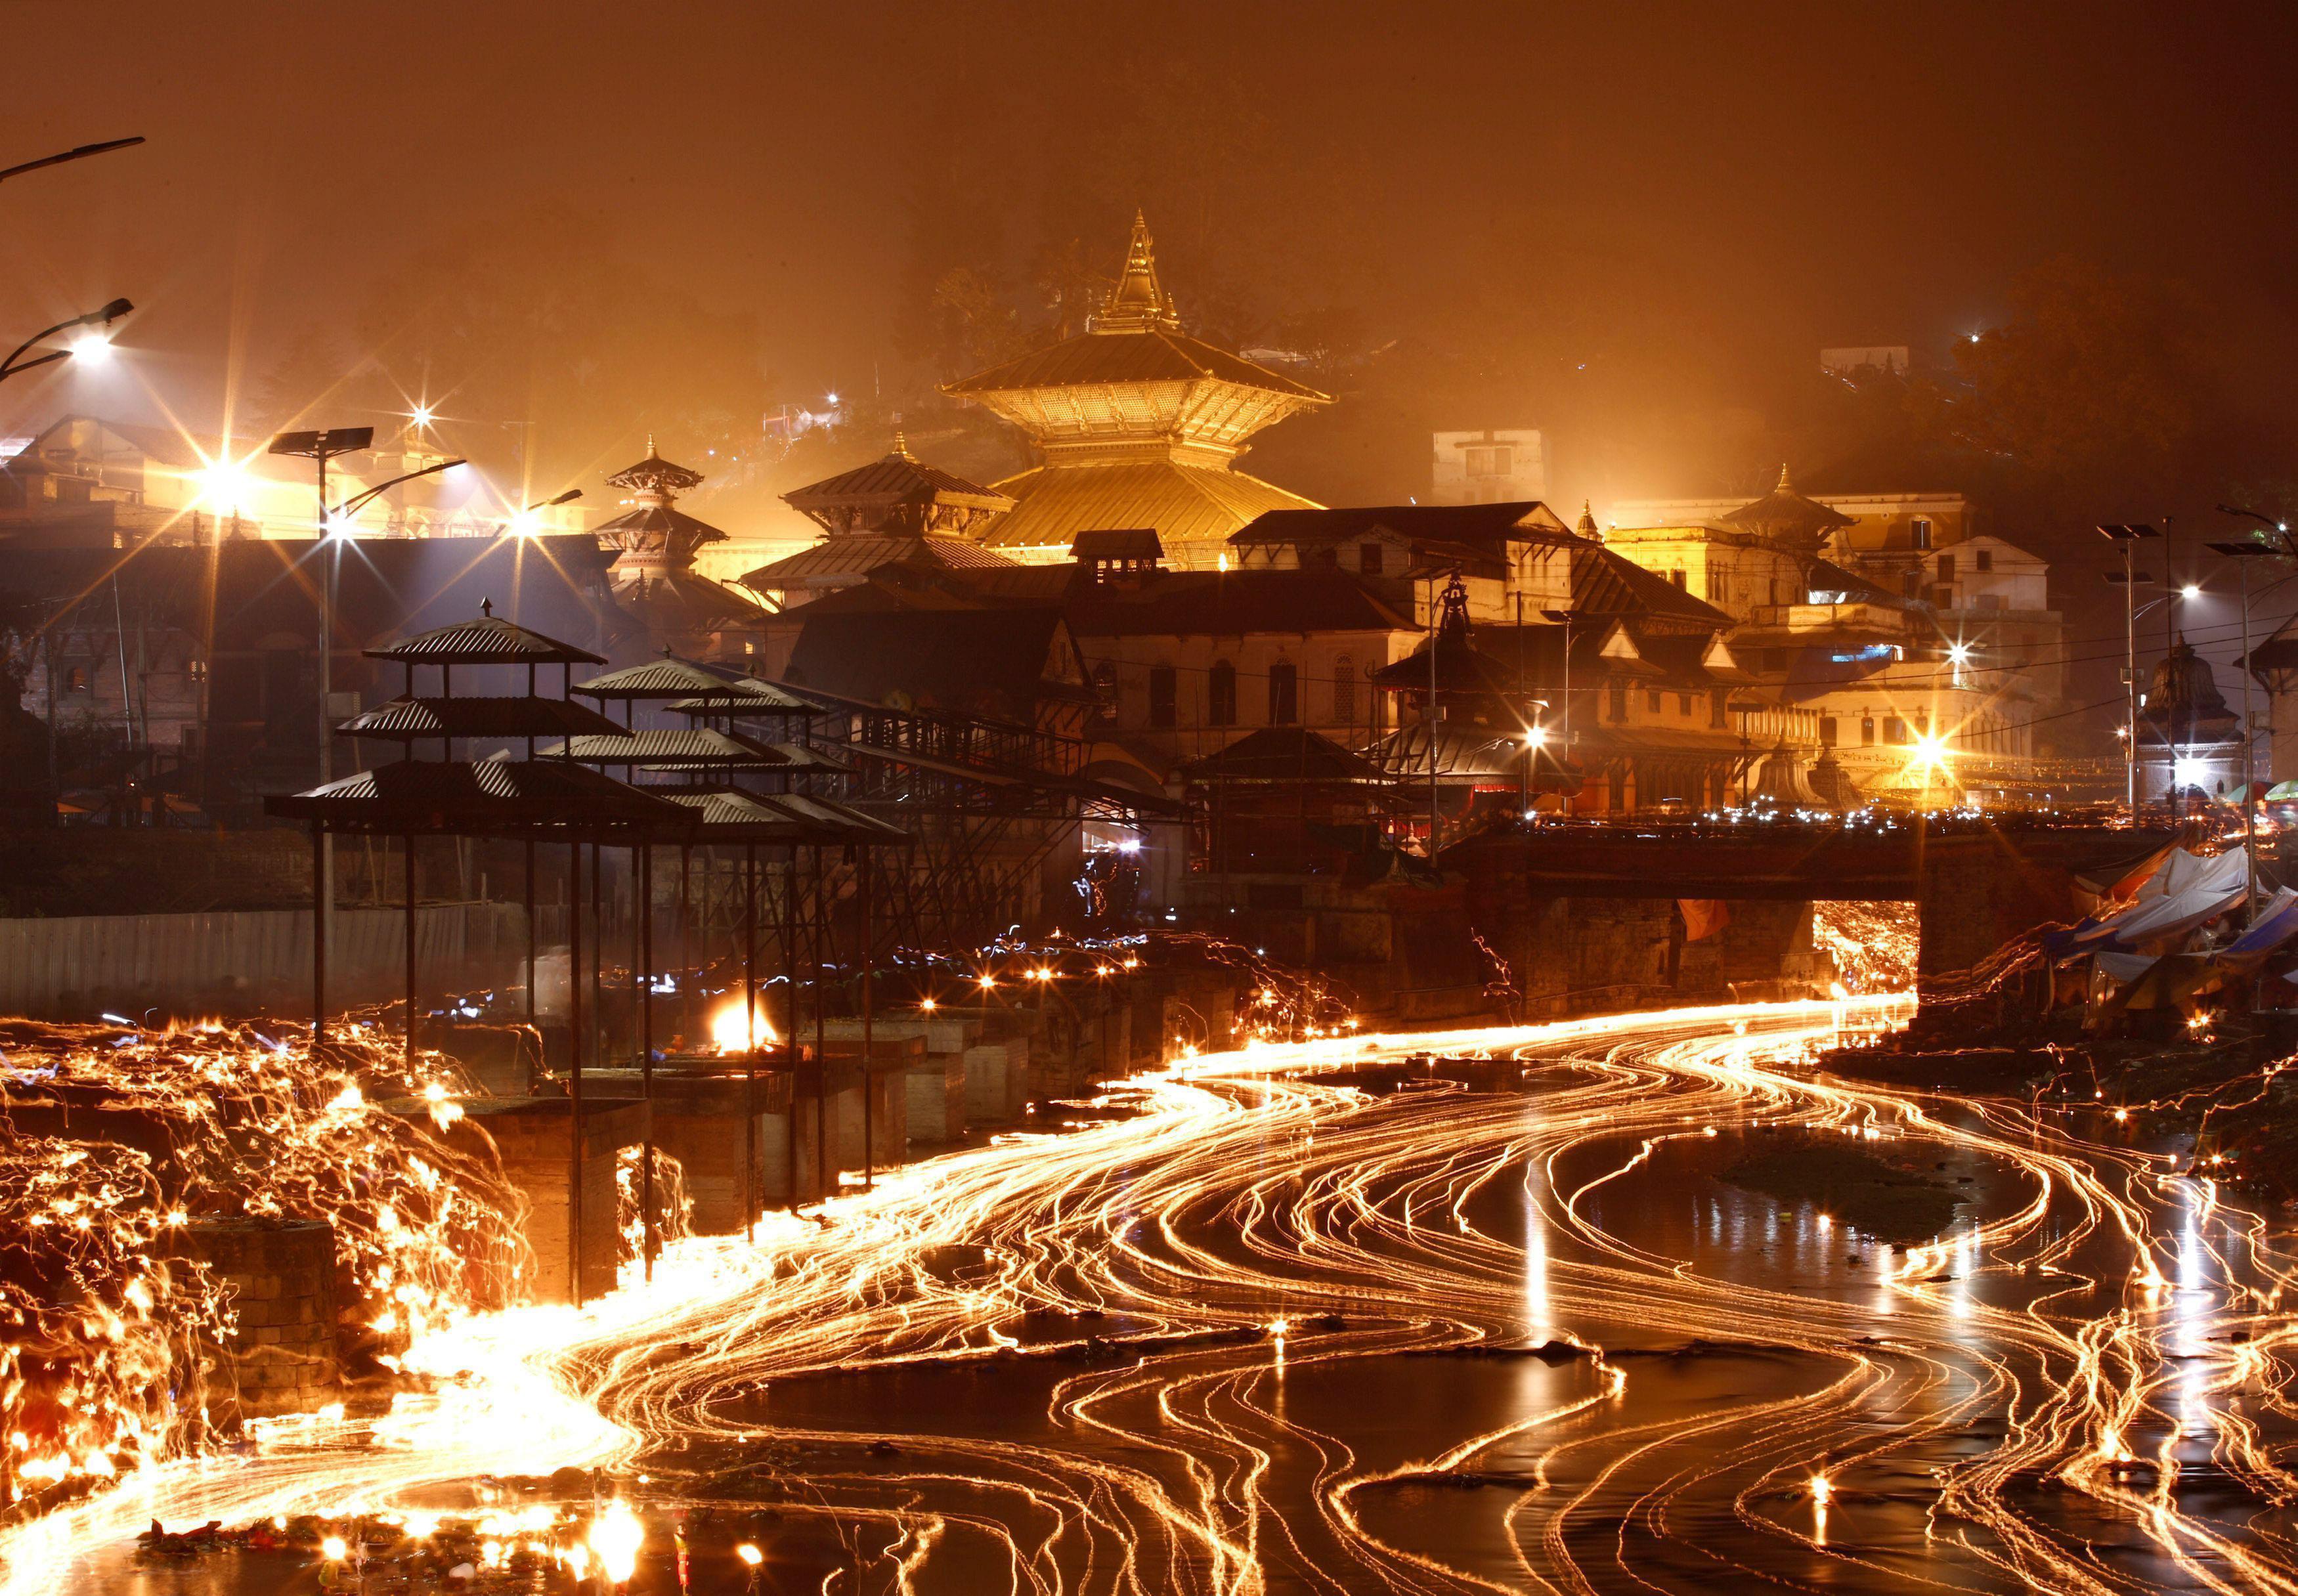 Oil lamps offered by devotees illuminate the Bagmati River flowing through the premises of the Pashu